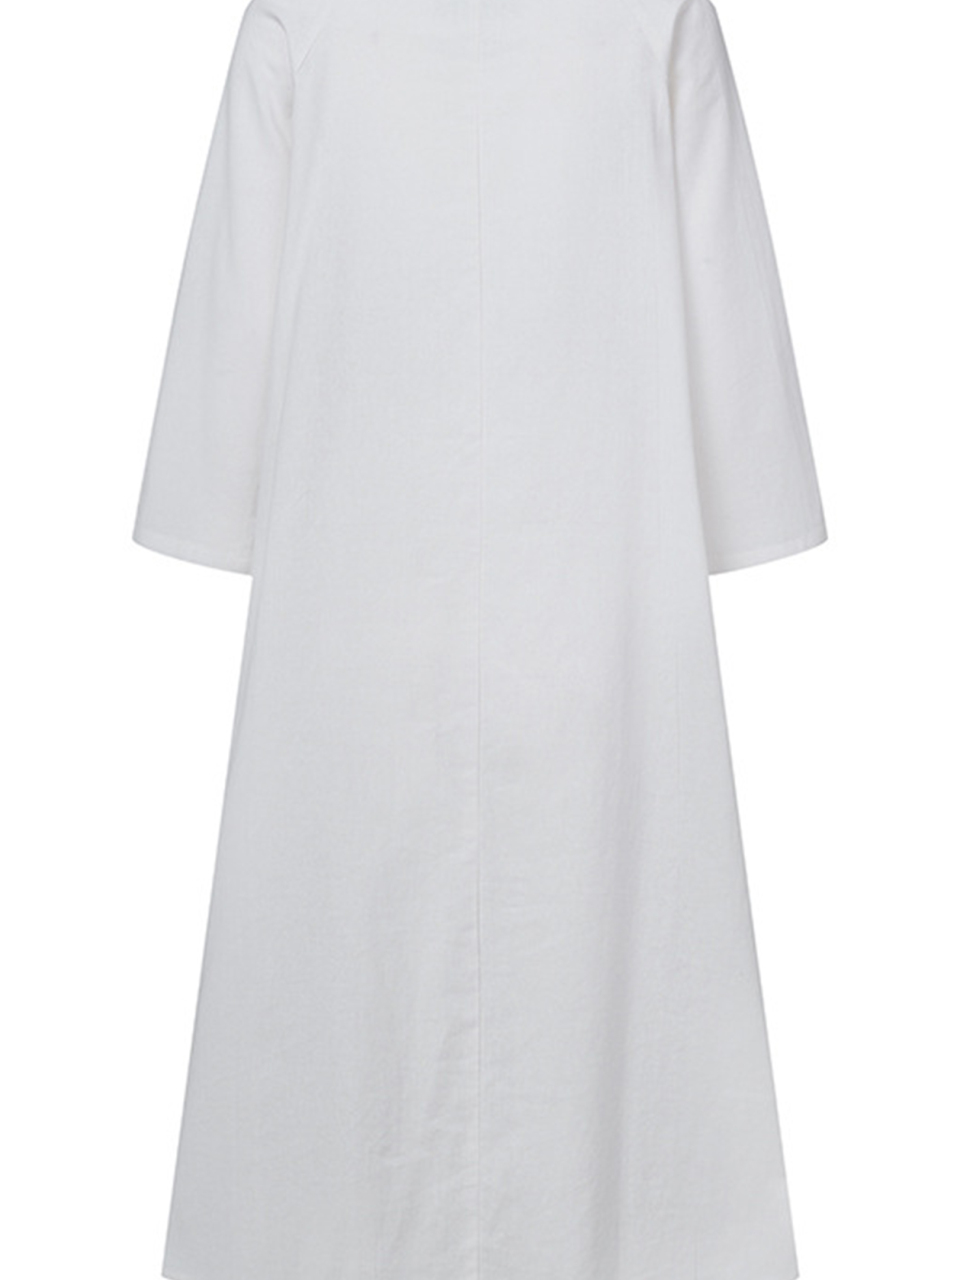 Women's Plain Cotton Casual Dress With Square Collar And Pocket